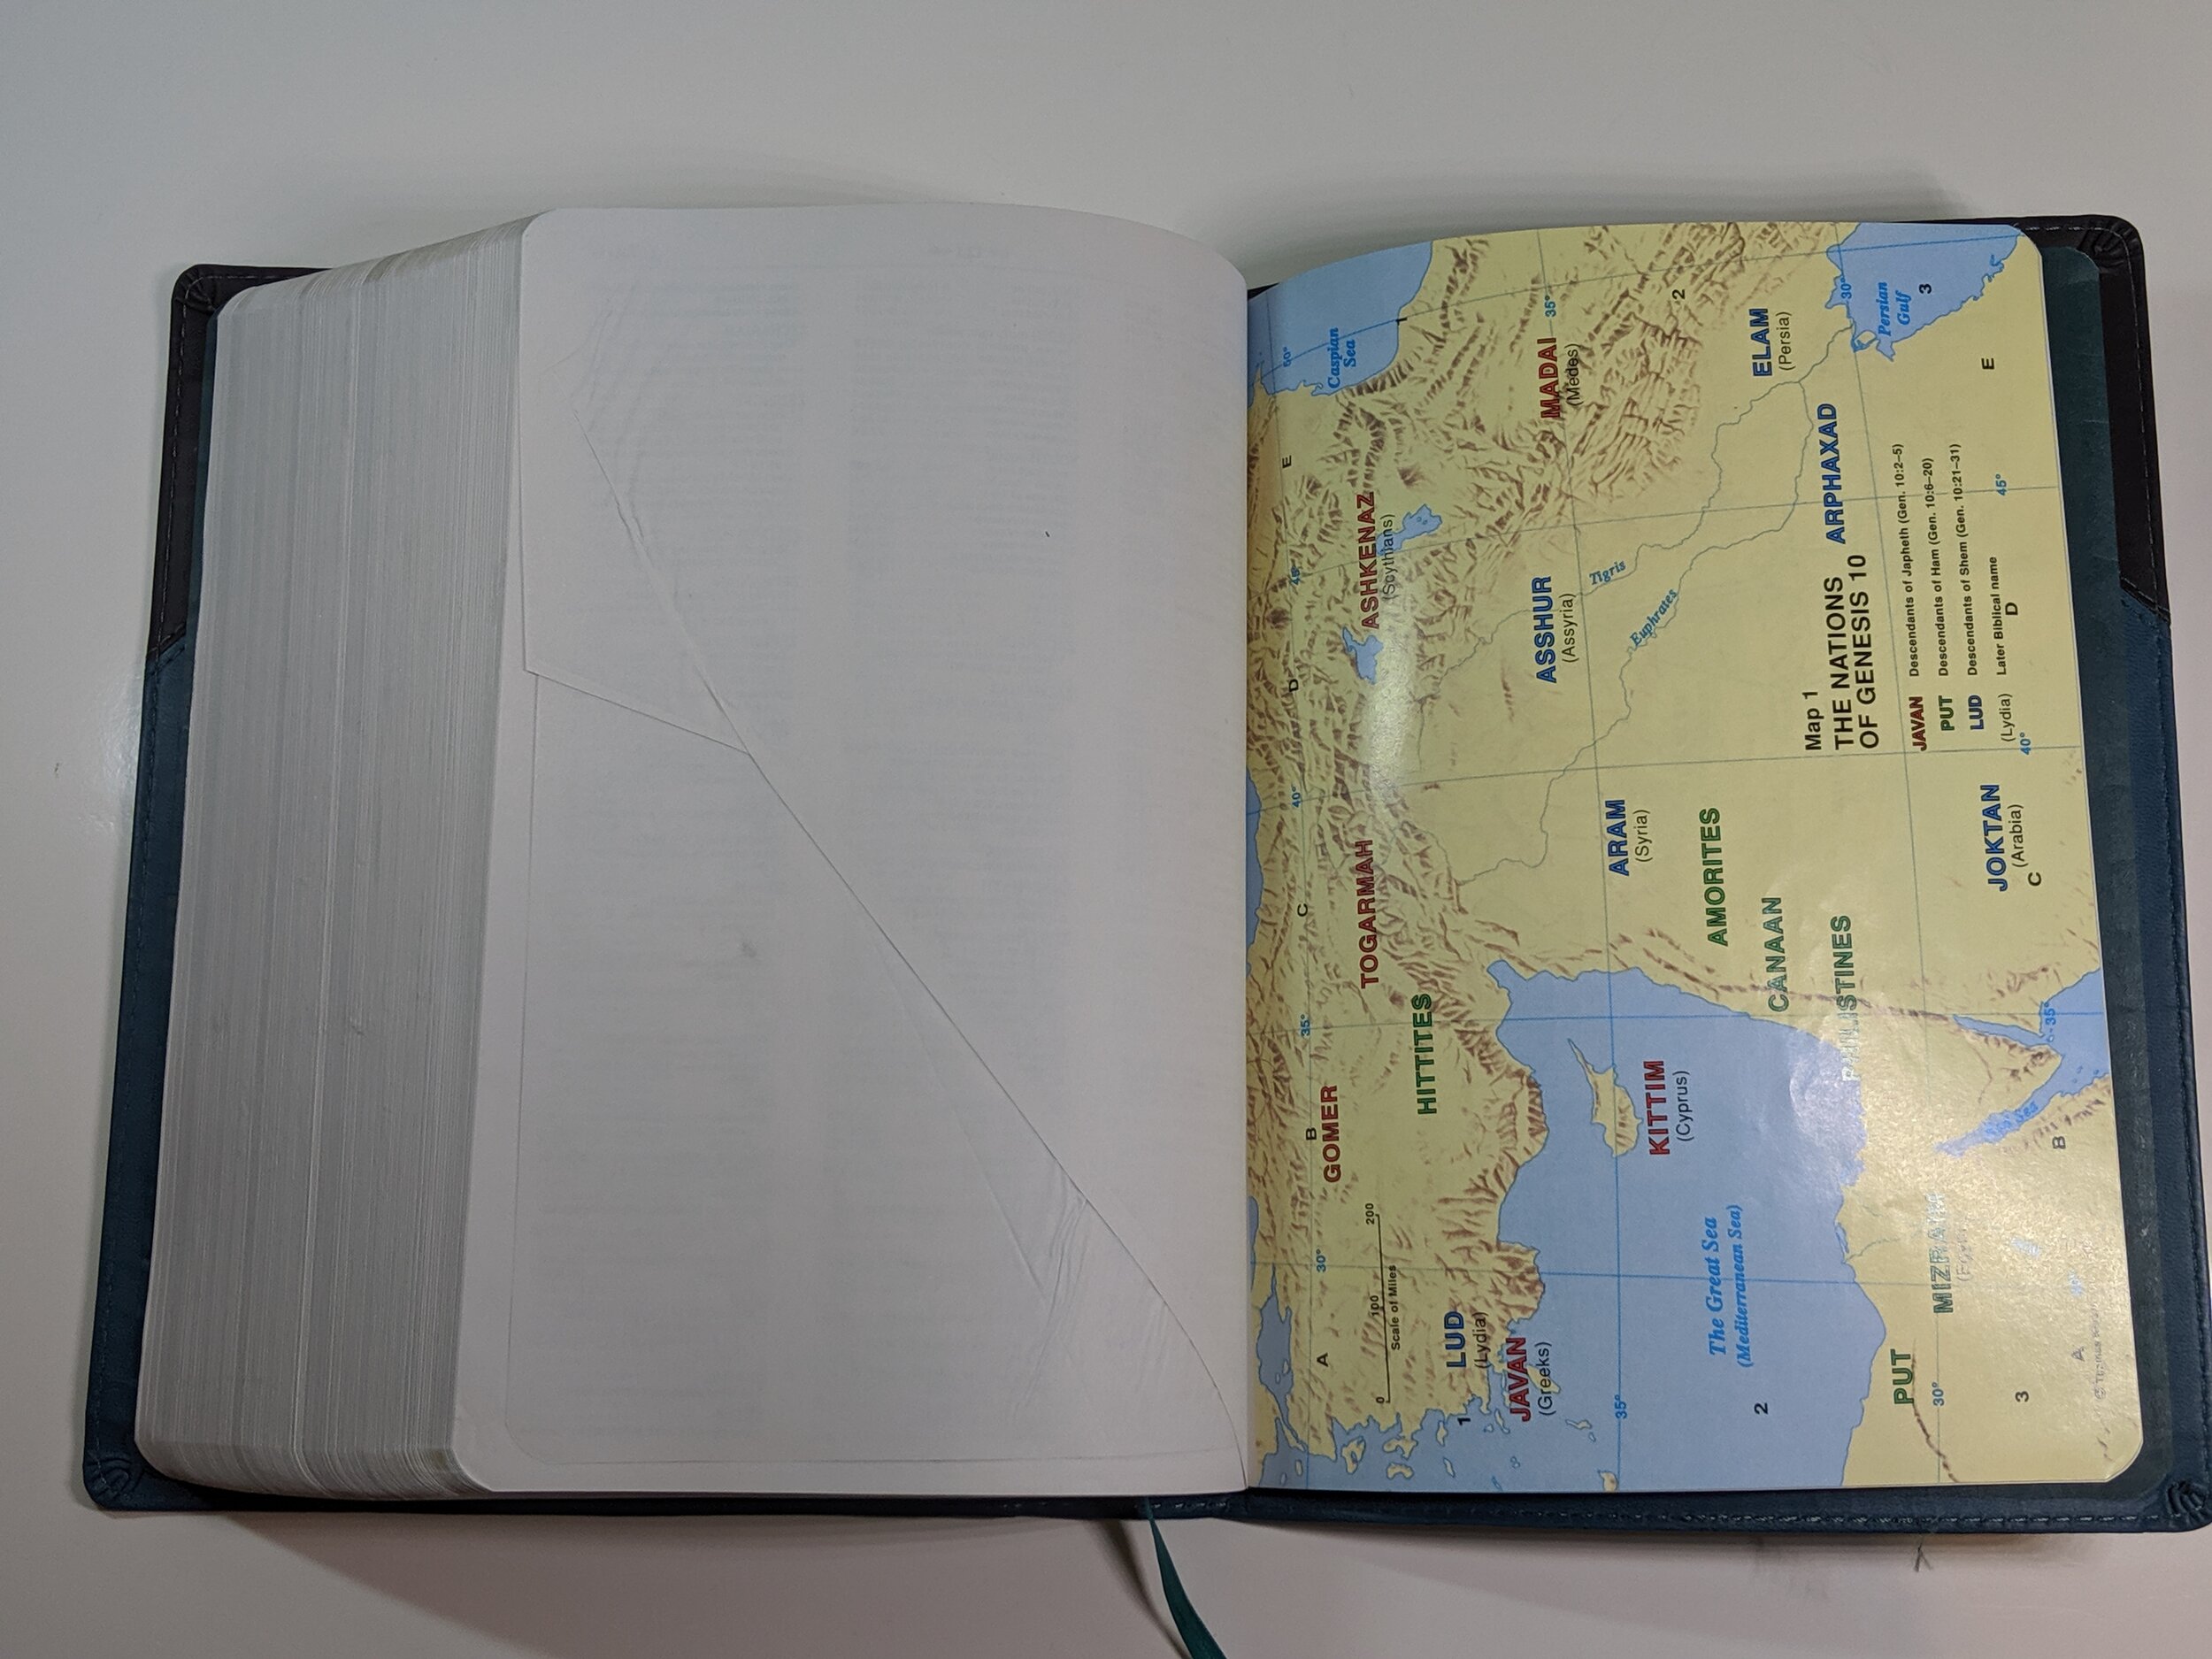  The first edition had one cardboard map 